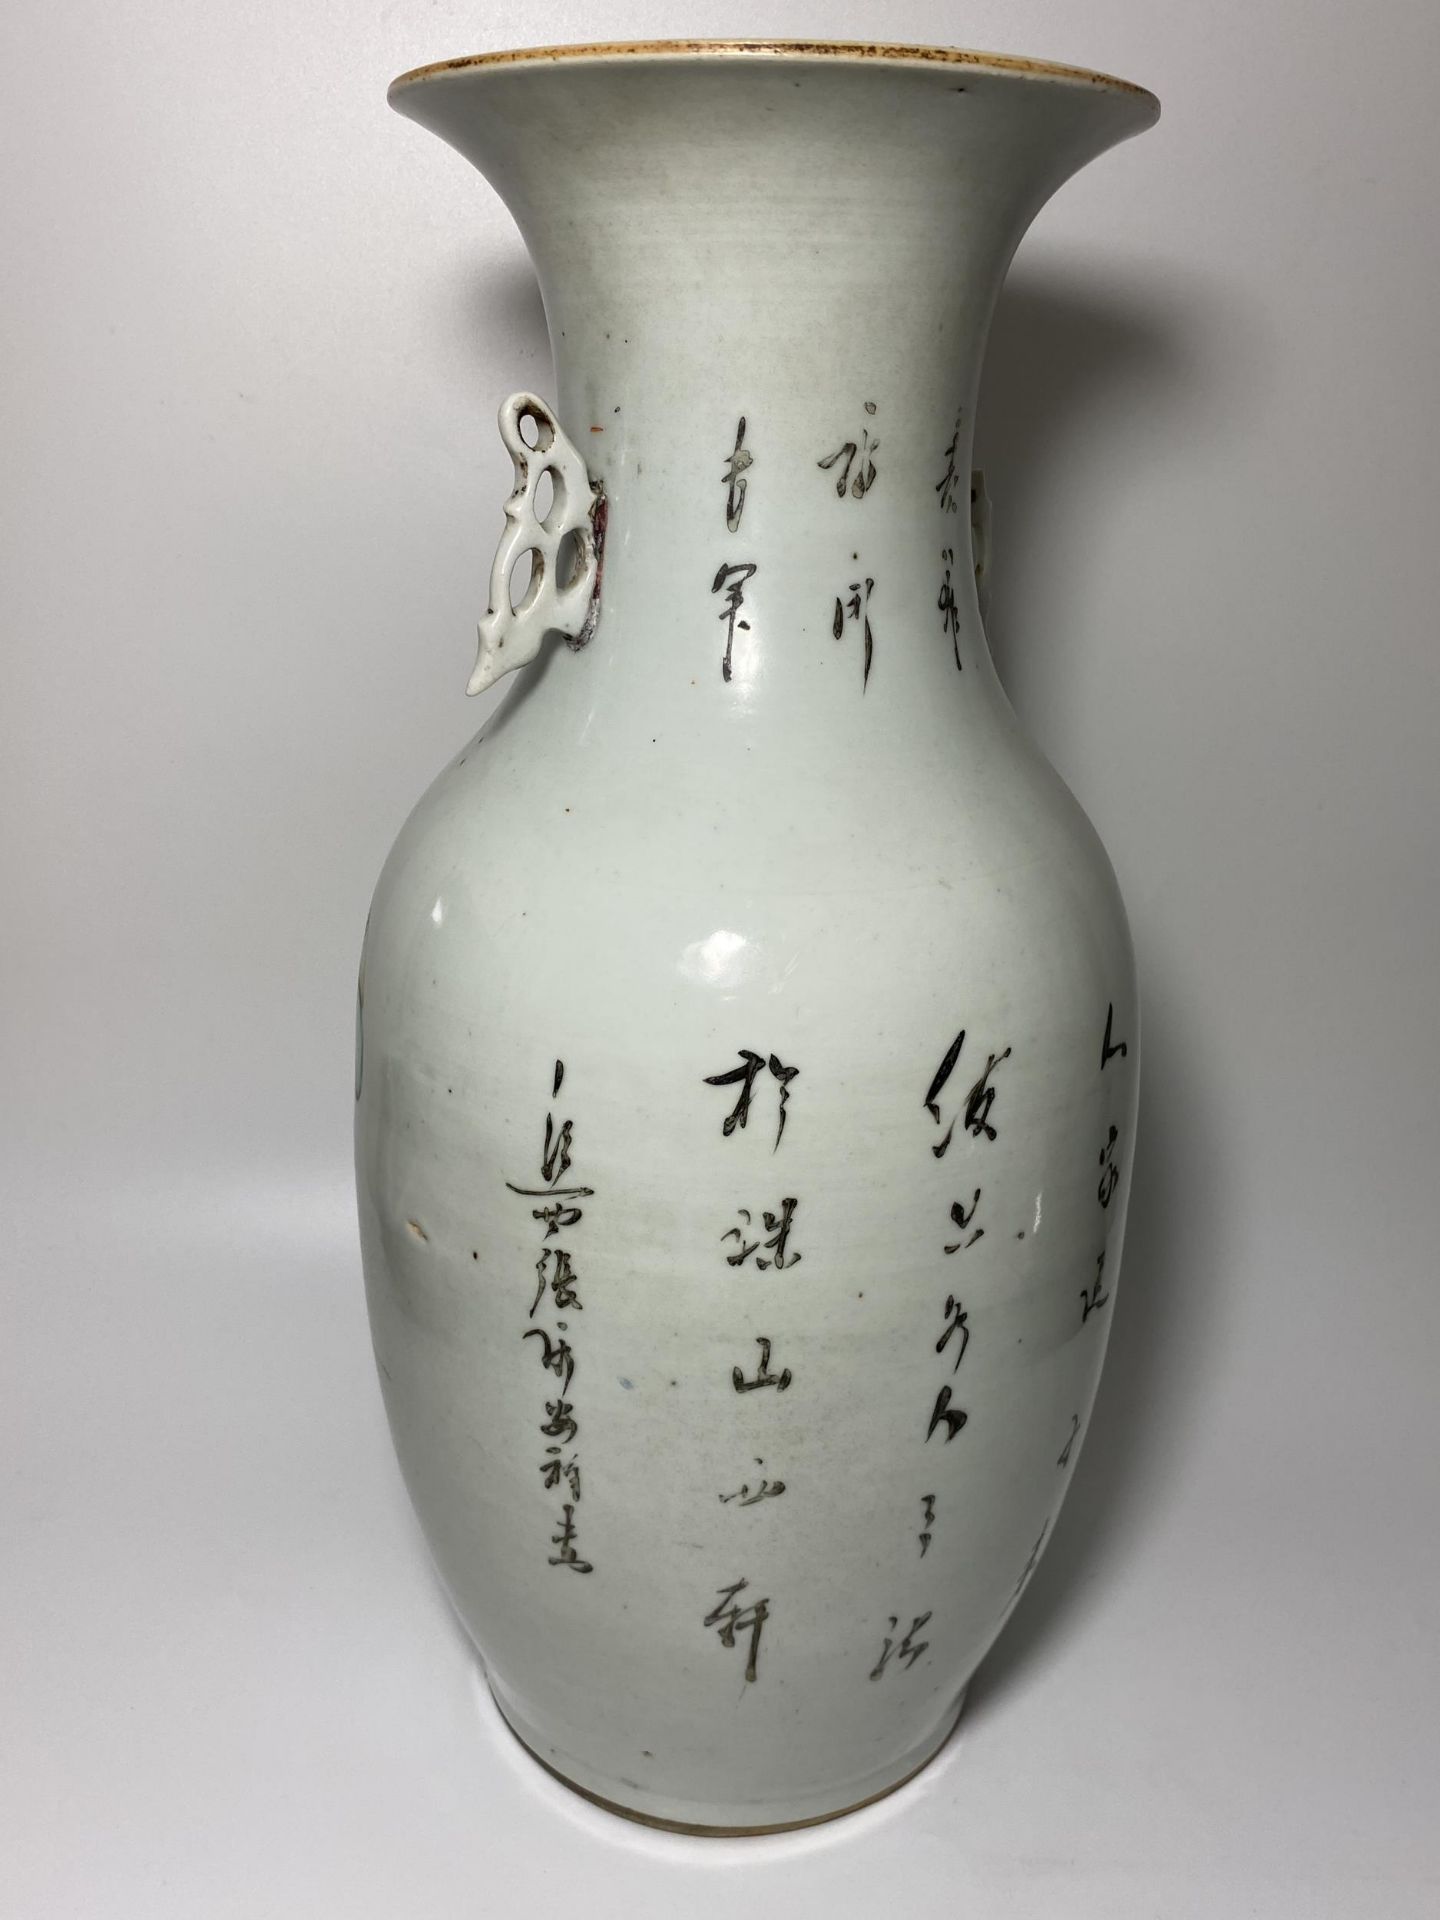 A LARGE 19TH CENTURY CHINESE QING PORCELAIN VASE WITH FIGURAL & CALLIGRAPHY DESIGN, HEIGHT 43CM - Image 5 of 11